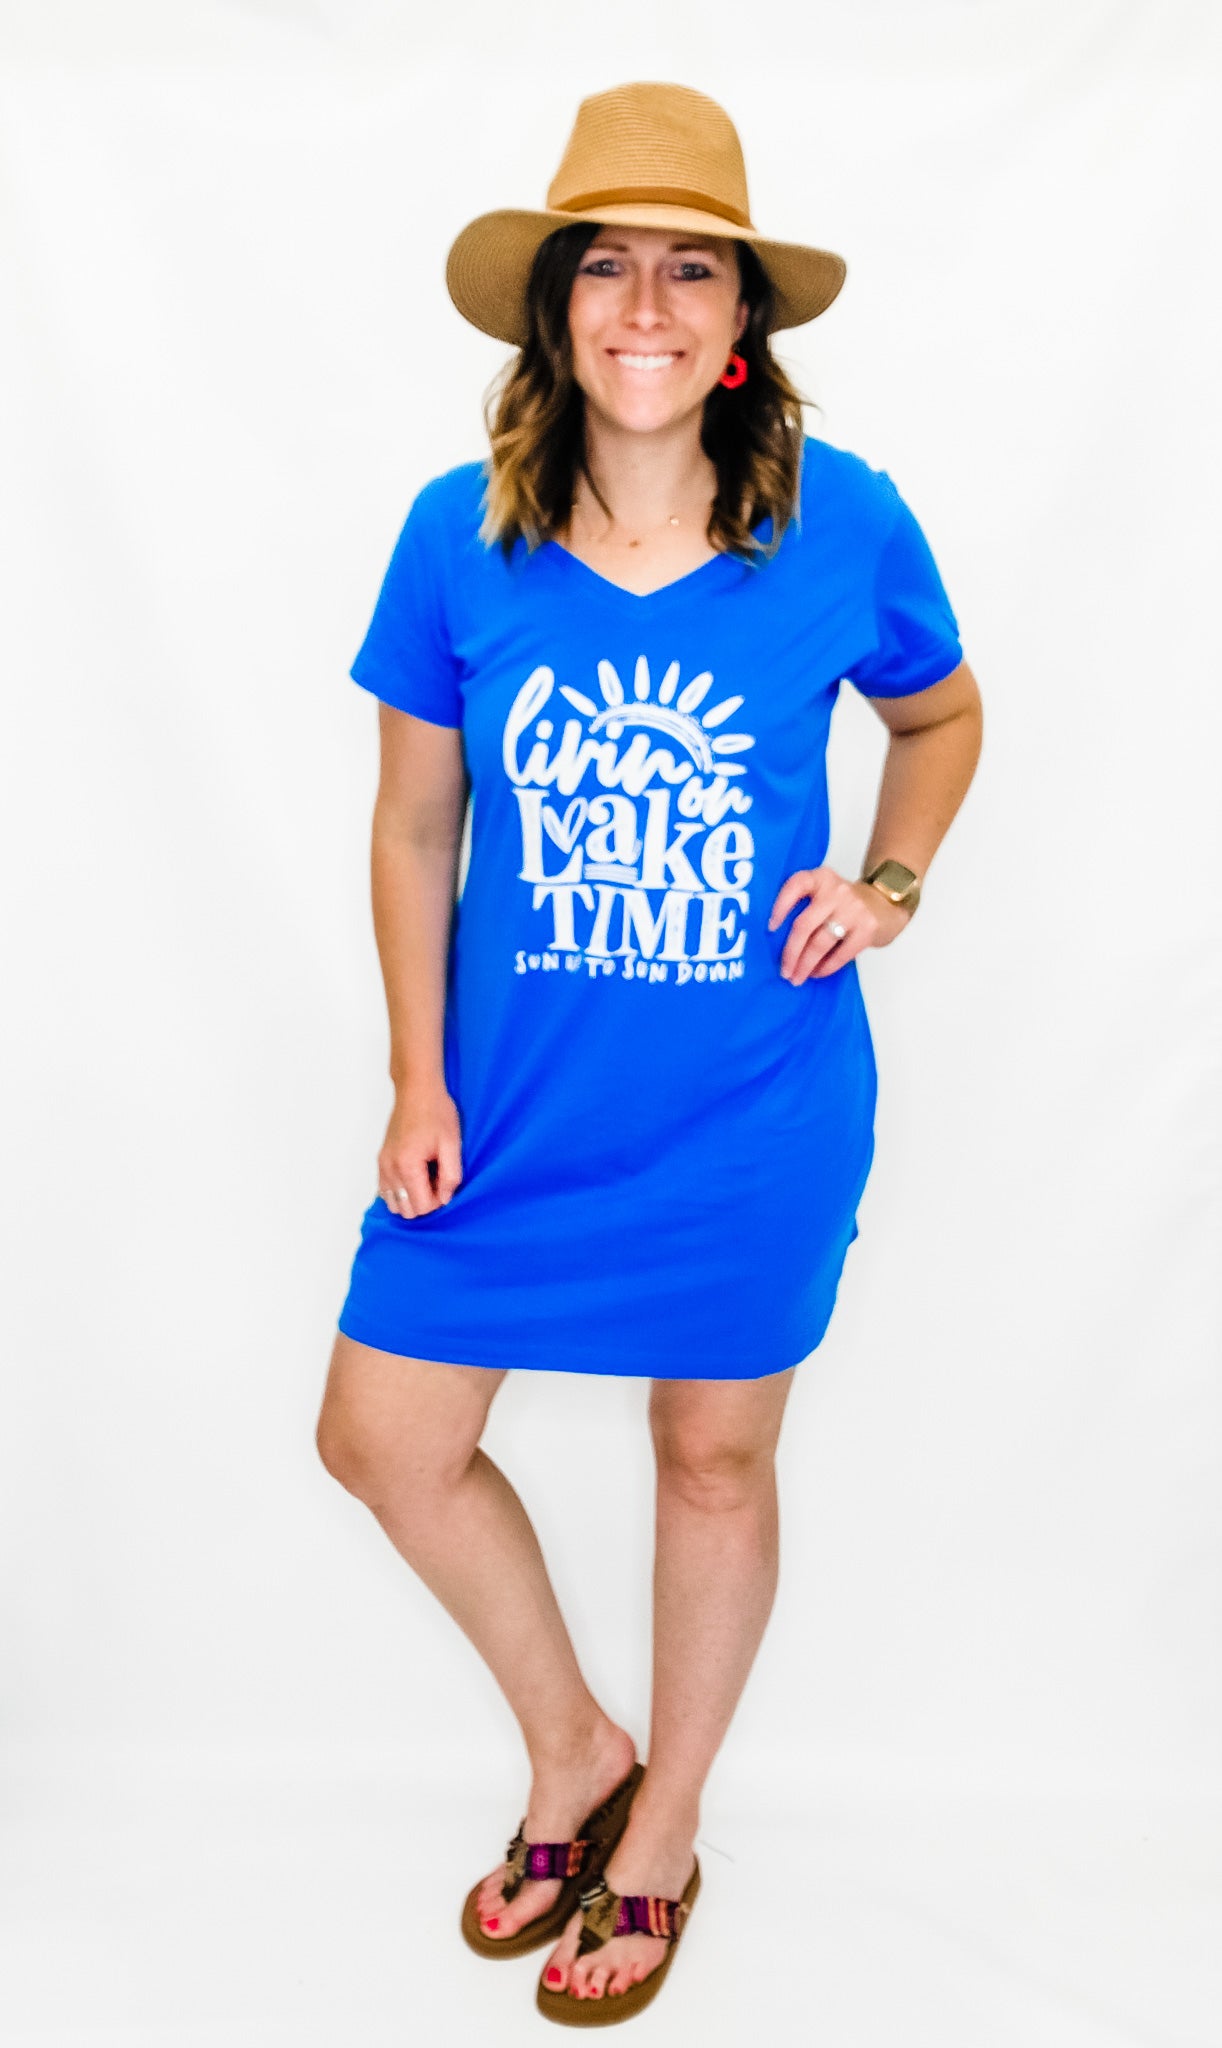 Livin' On Lake Time Graphic Dress